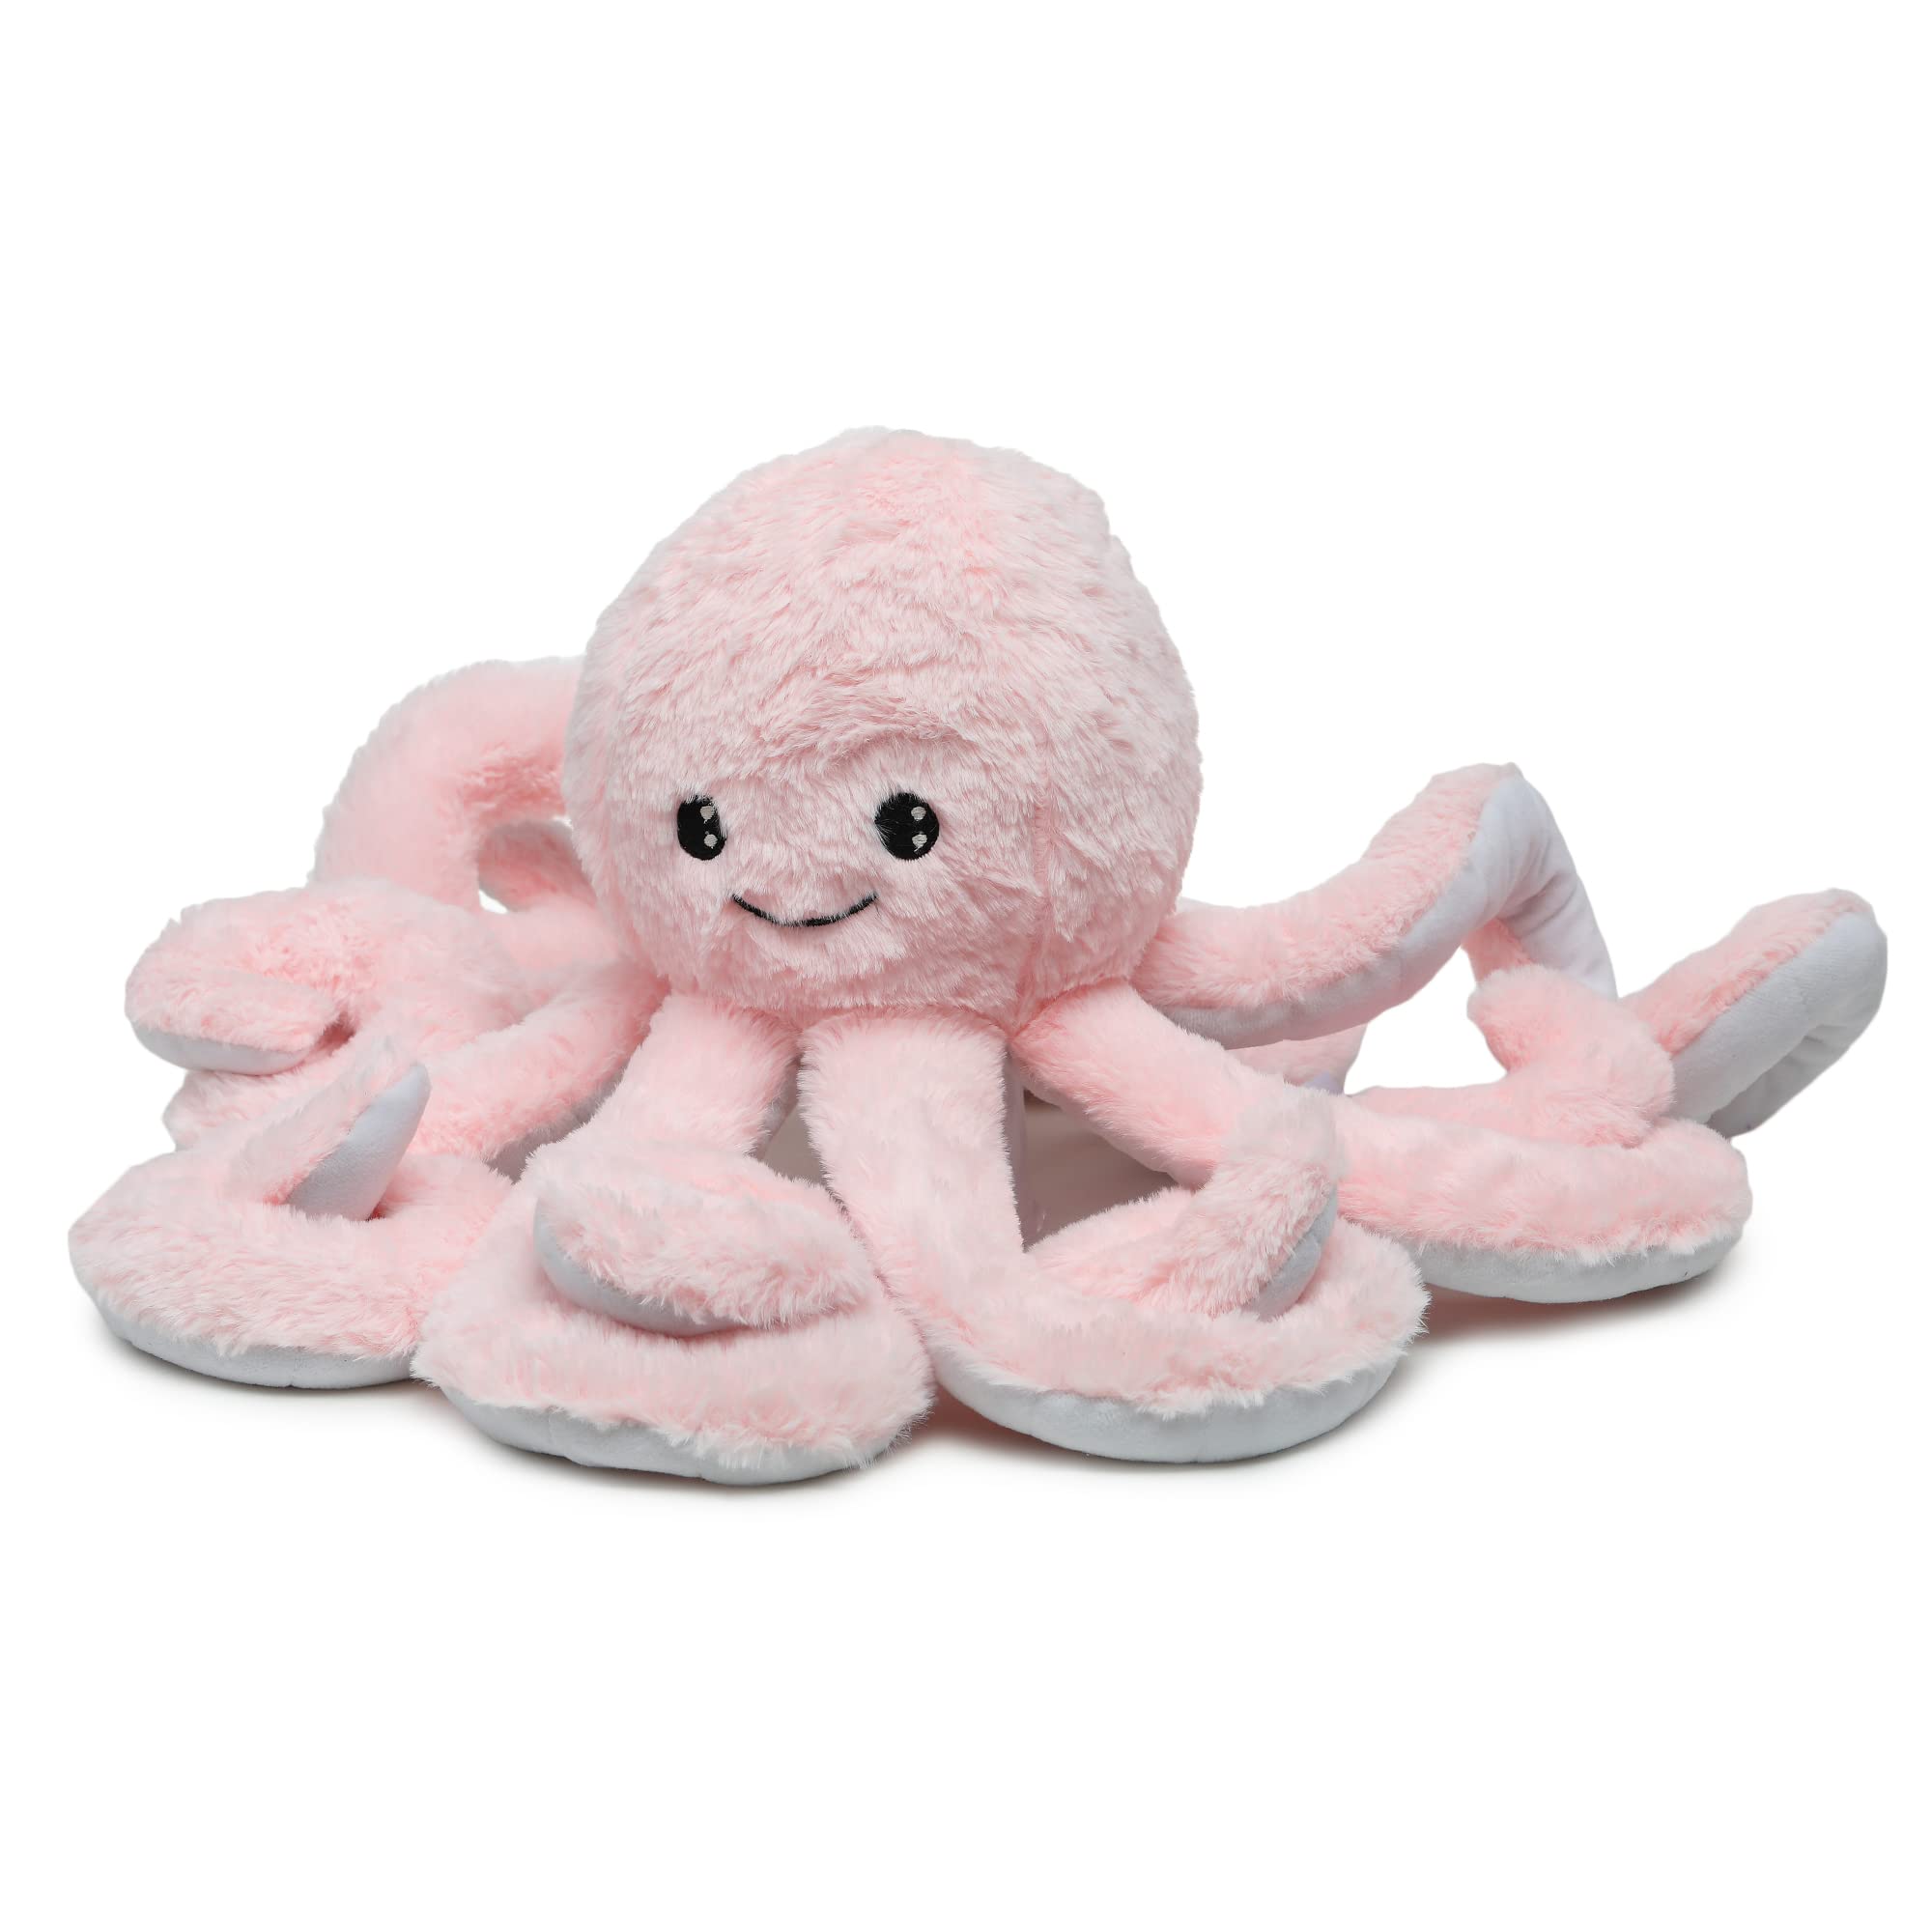 Webby Plush Giant Realistic Stuffed Octopus Animals Soft Toy, Pink